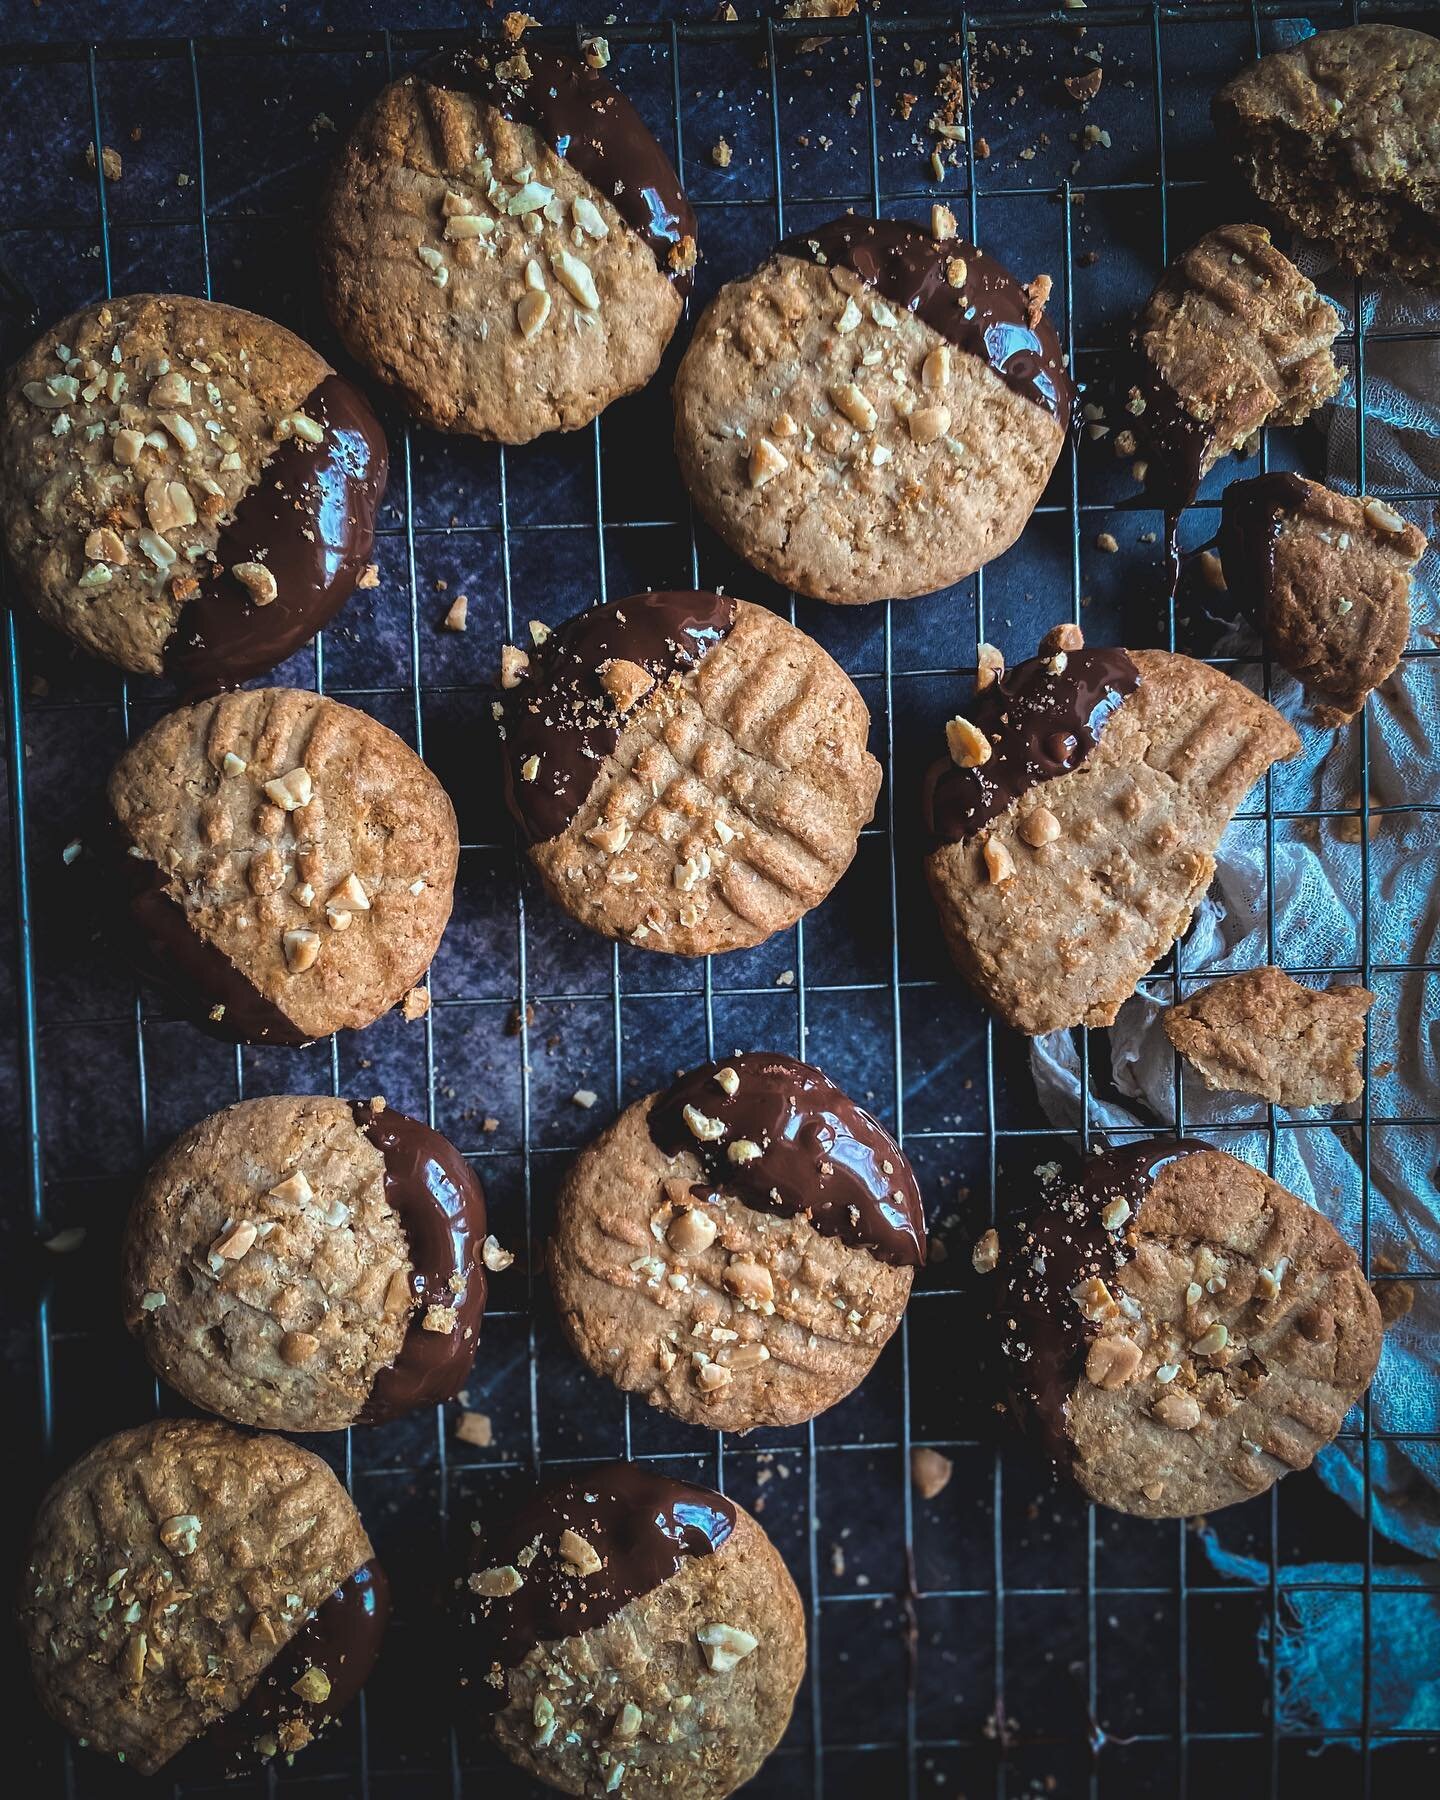 Sourdough peanut butter cookies dipped in dark chocolate. Happy hump day. 

#sourdough #sourdoughbaking #sourdoughcookies #sourdoughcookbook #peanutbuttercookies #sourdoughpeanutbuttercookies #adventuresinsourdough #sourdoughchronicles #bakingwithsou